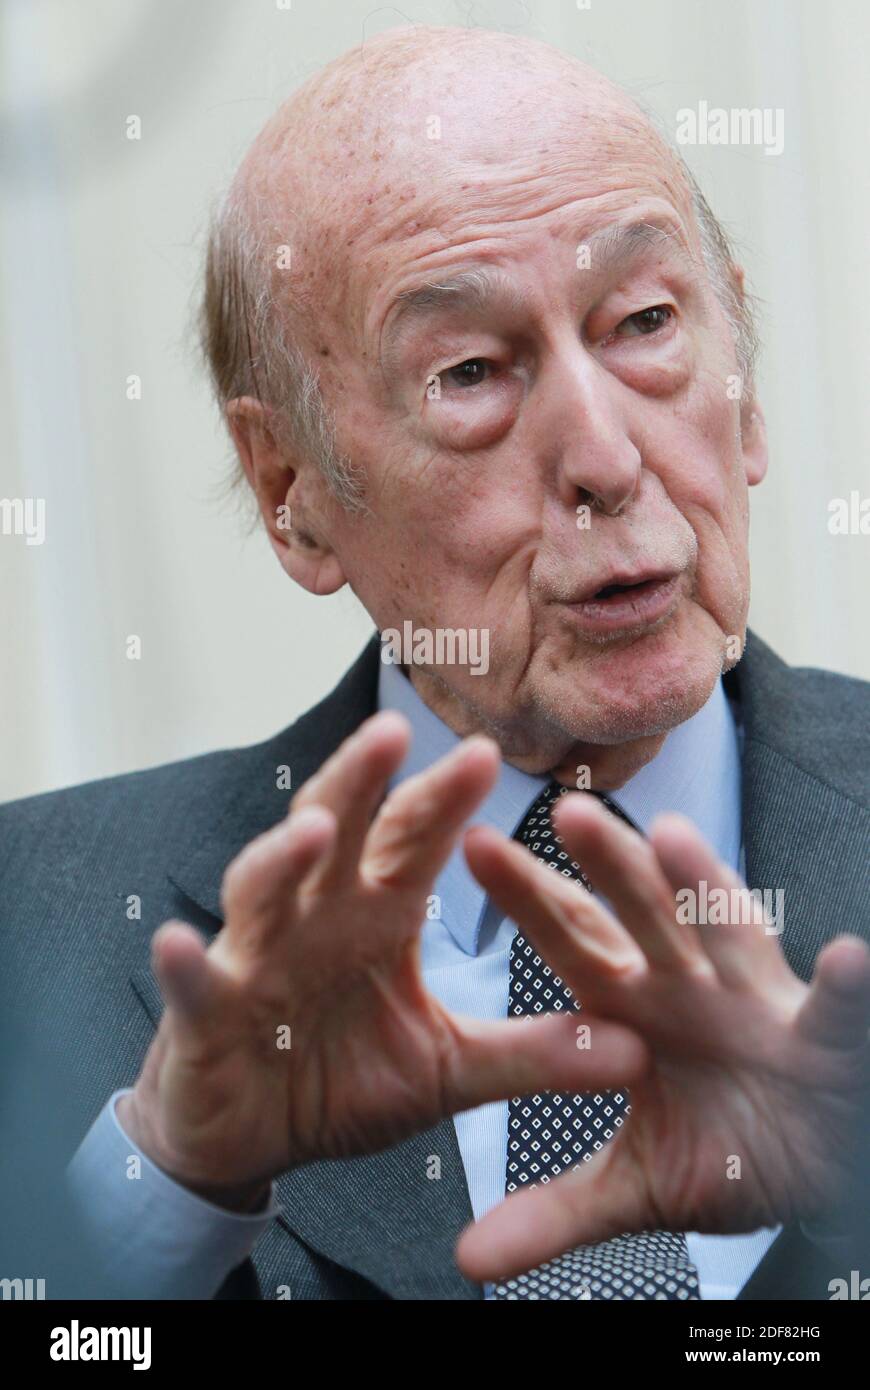 (201203) -- PARIS, Dec. 3, 2020 (Xinhua) -- File photo taken on April 18, 2013 shows Valery Giscard d'Estaing in Paris, France. France's former President Valery Giscard d'Estaing died Wednesday evening at the age of 94, local media reported. (Xinhua/Gao Jing) Stock Photo